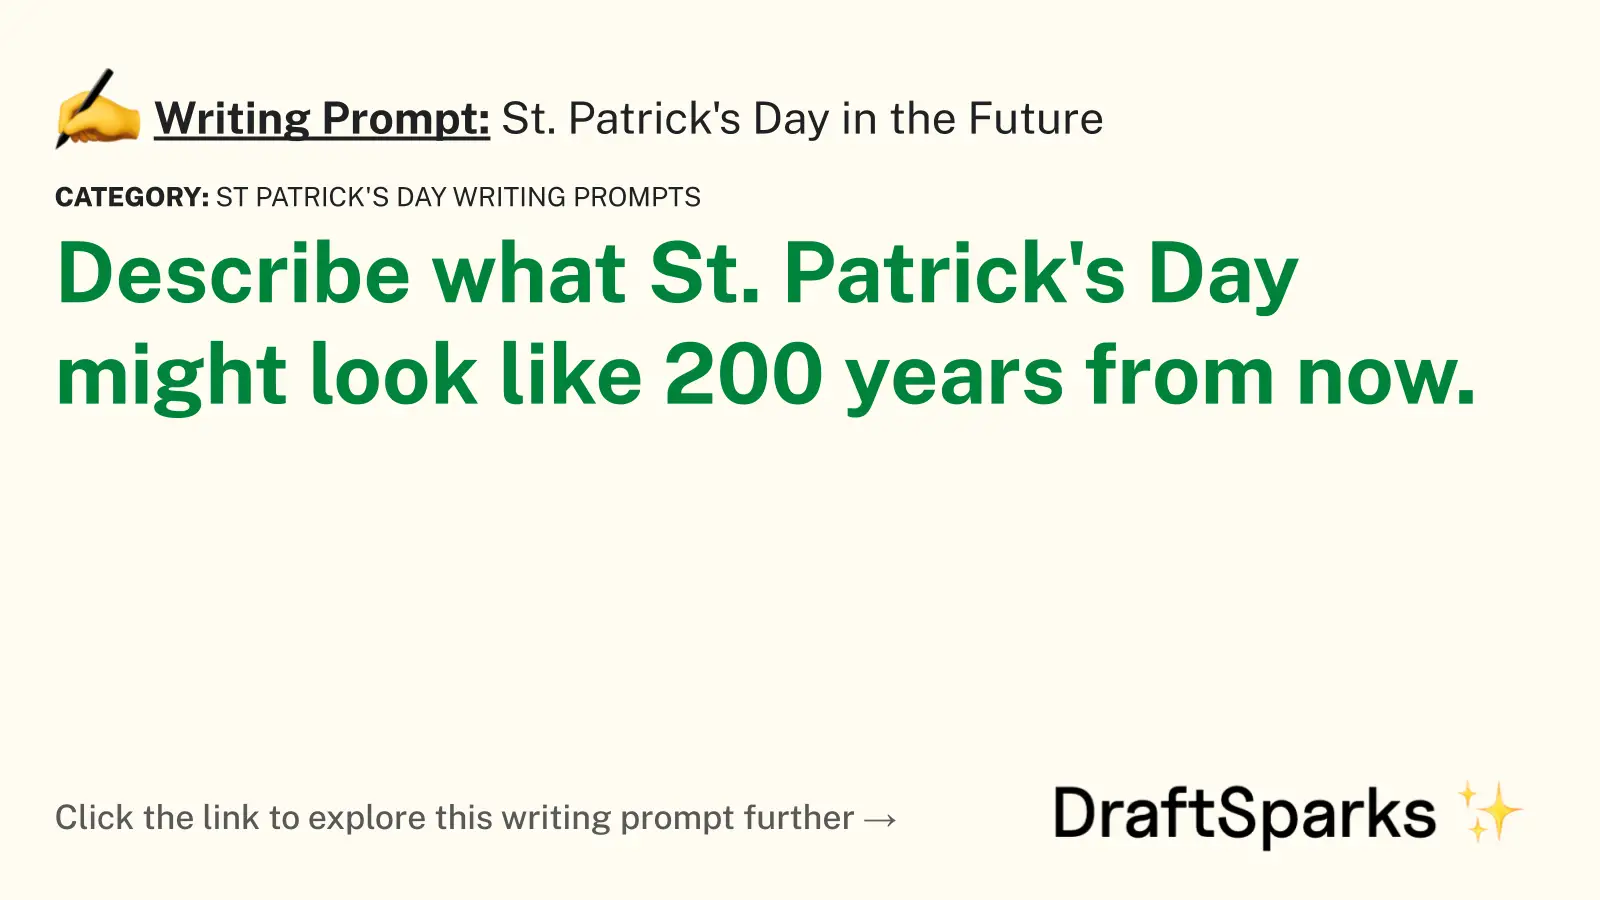 St. Patrick’s Day in the Future